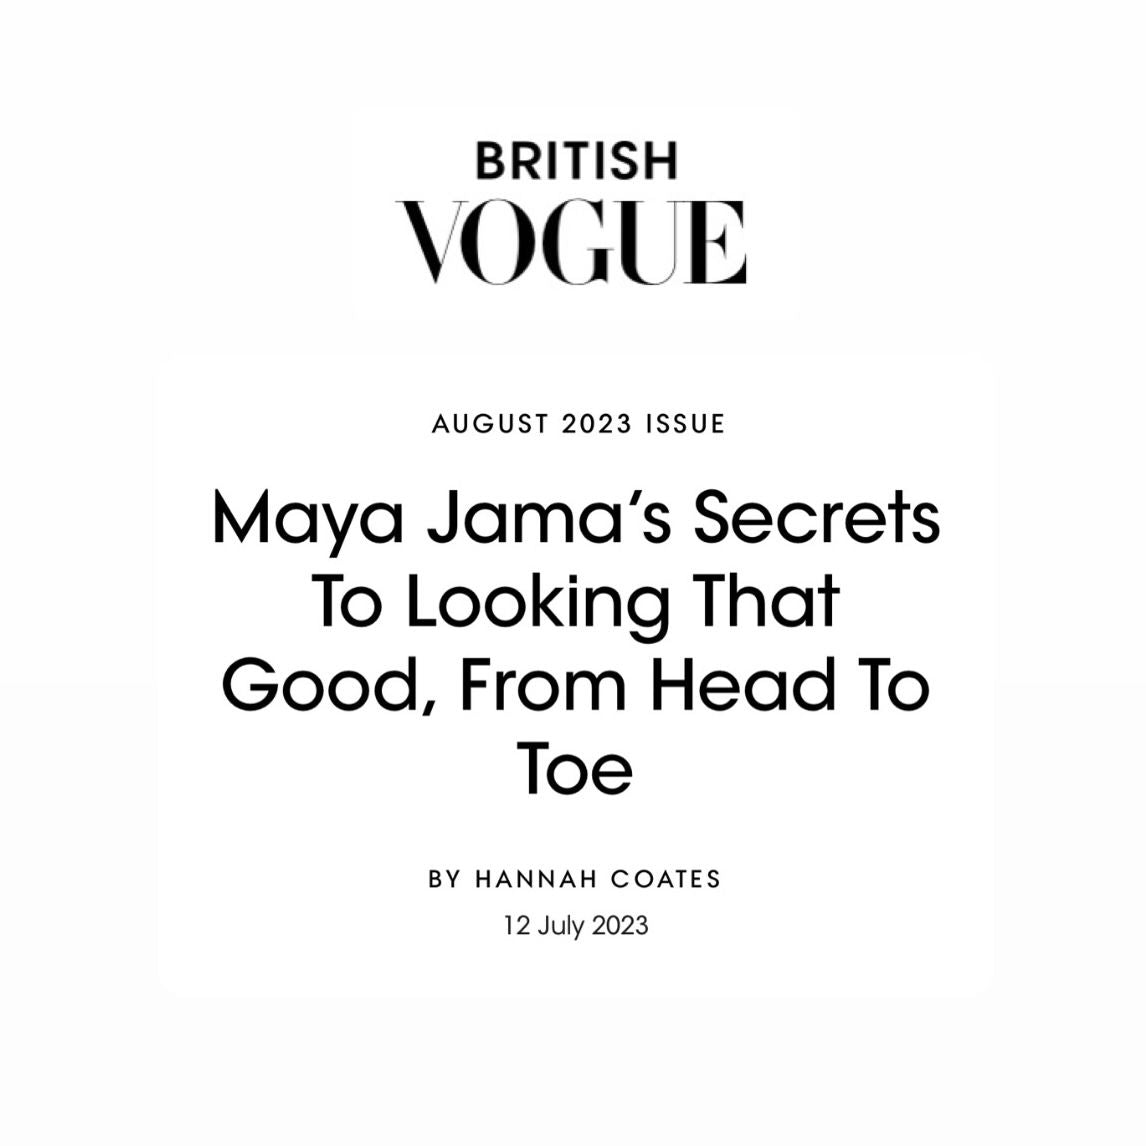 Shane Featured In British Vogue: Maya Jama’s Secrets To Looking That Good, From Head To Toe